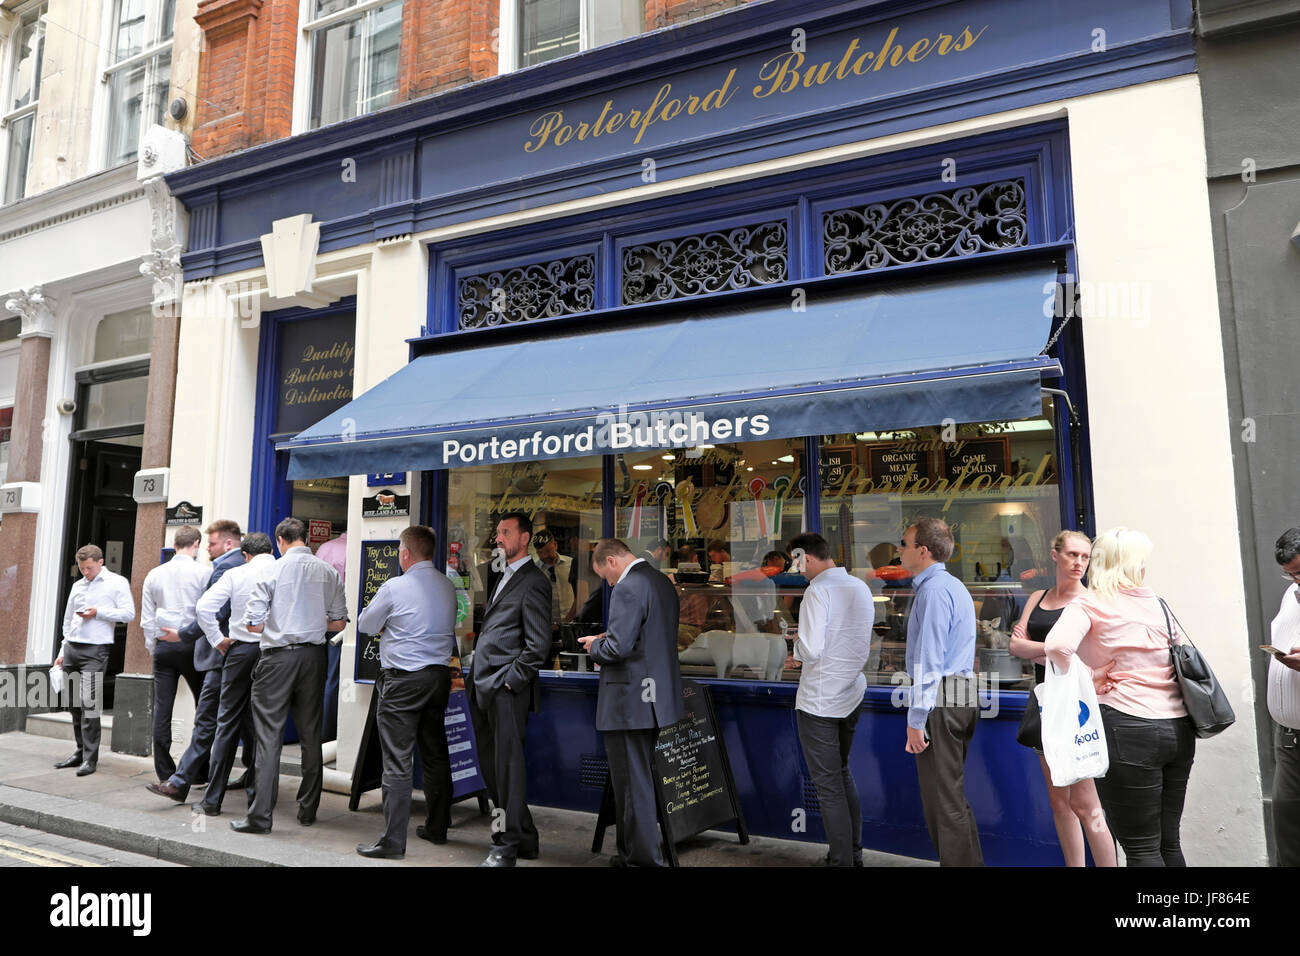 Businessmen and women queuing for food outside Porterford Butchers shop at lunchtime Watling Street in the City of London EC4 England UK  KATHY DEWITT Stock Photo